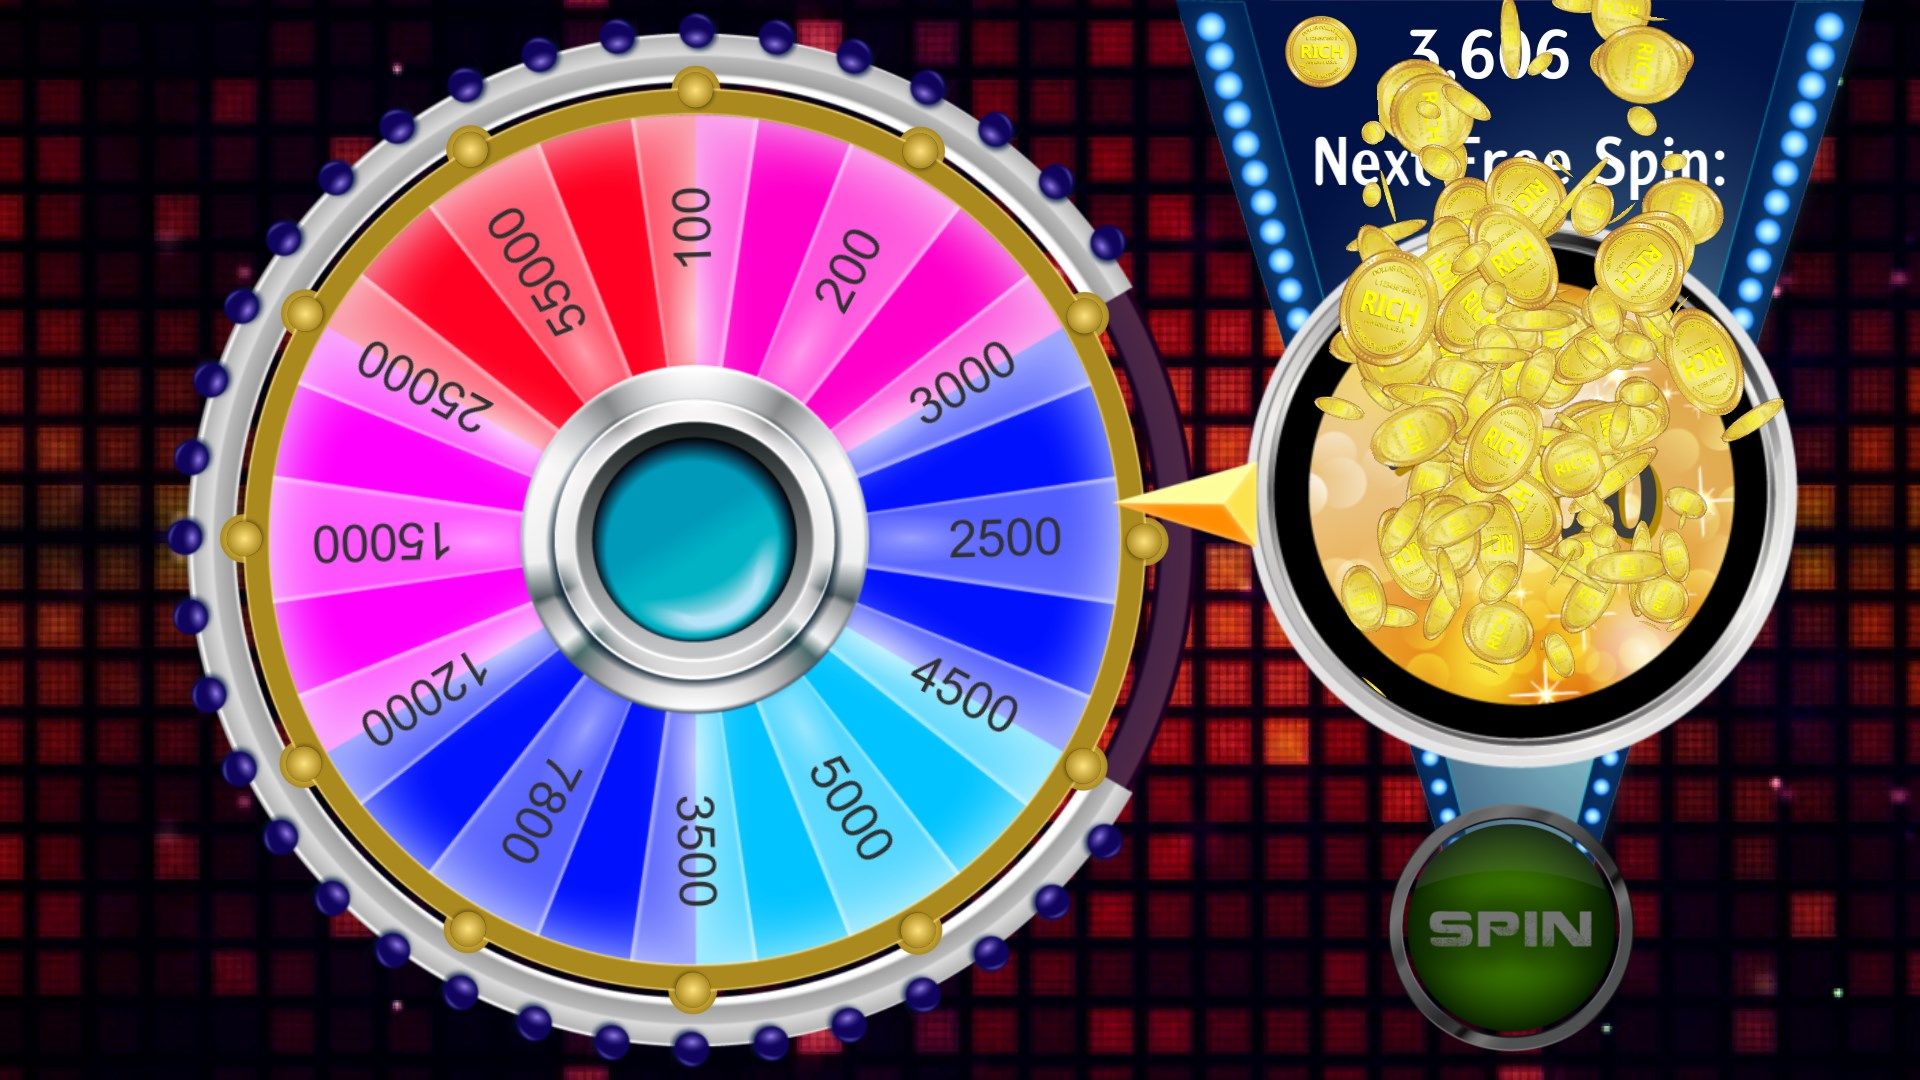 Locowin Wheel of Fortune